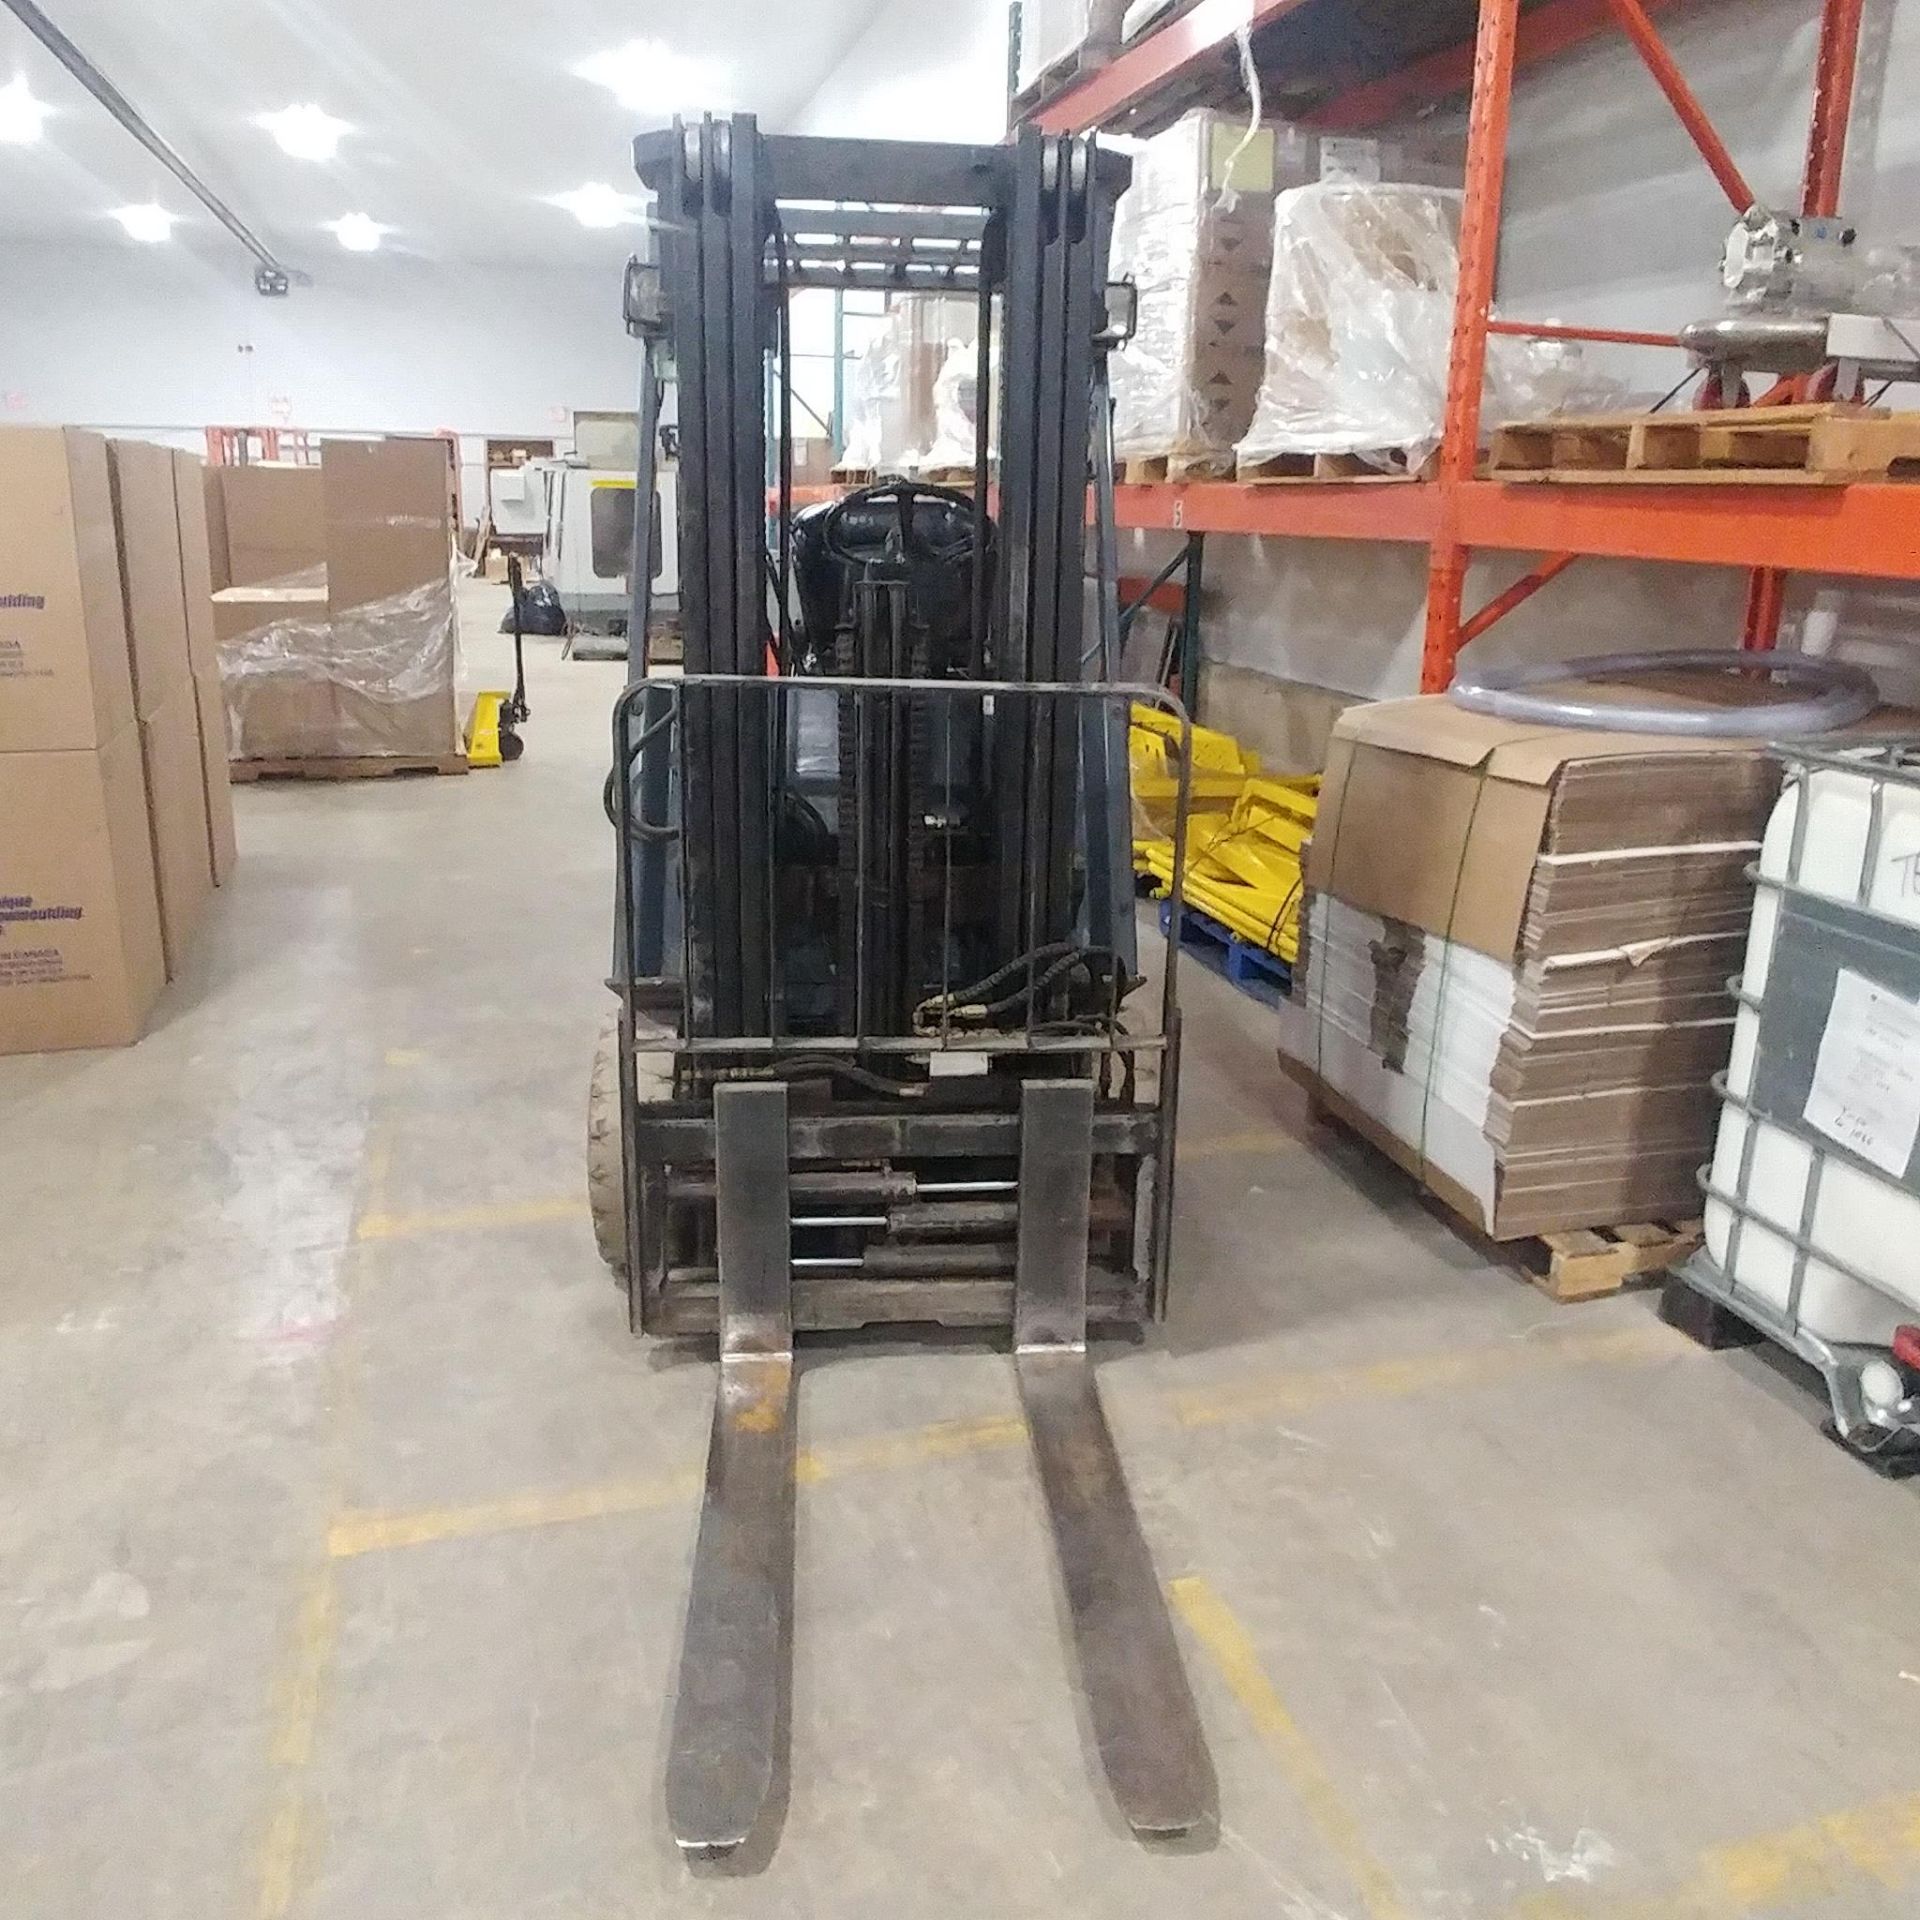 Toyota Electric Forklift Truck - 3 Stage - c/w chargers - 5000 lb capacity - Image 3 of 28